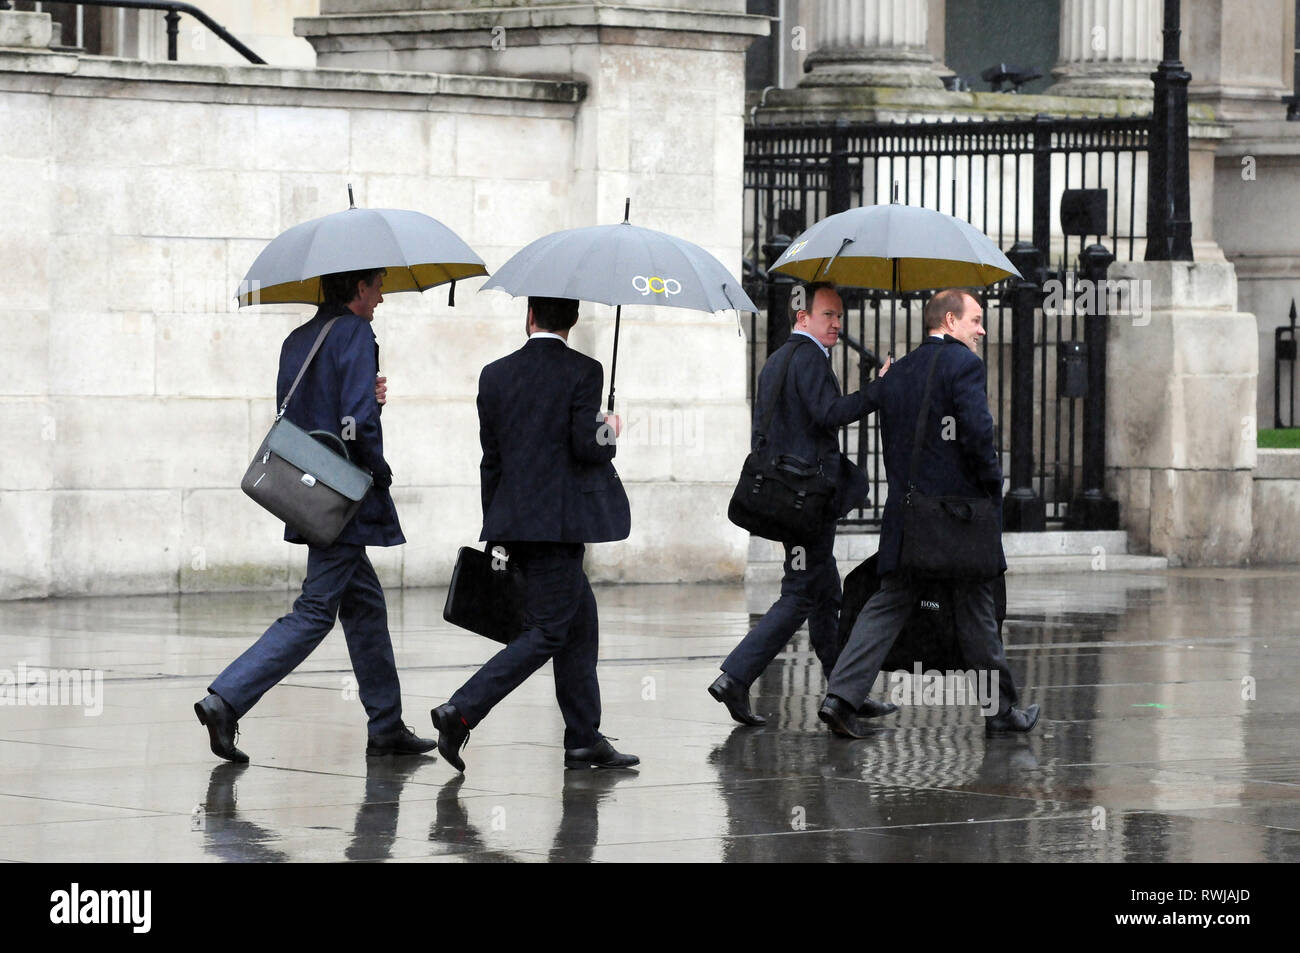 London, UK, 6 March 2019  Midweek showers in Trafalgar Square London.  Credit: JOHNNY ARMSTEAD/Alamy Live News Stock Photo